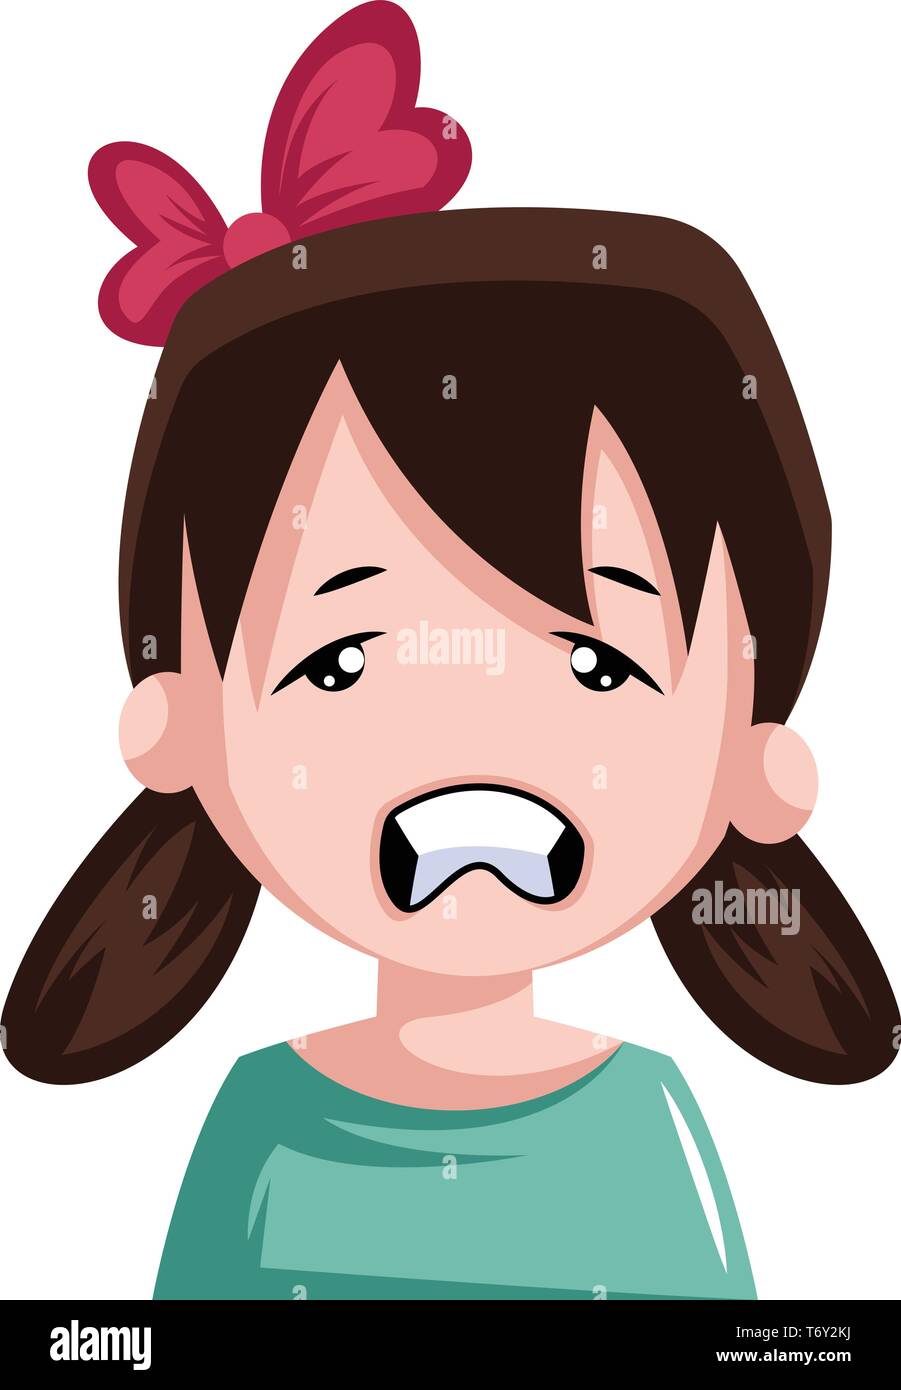 Stressed little girl with pigtails and bow in her hair illustration vector on white background Stock Vector